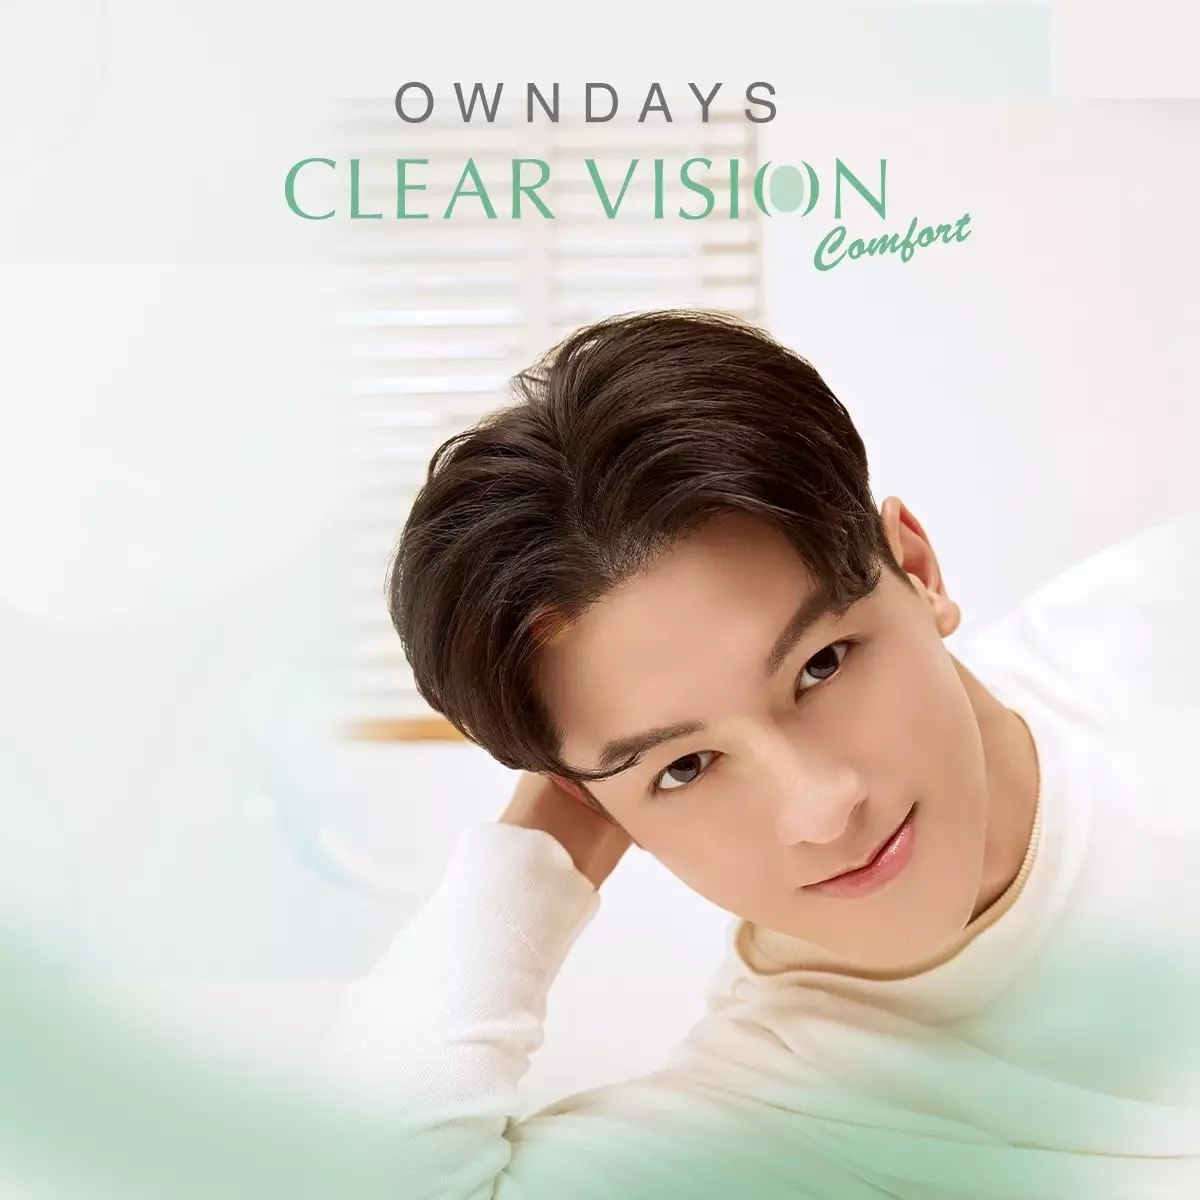 OWNDAYS CLEAR CONTACT LENS